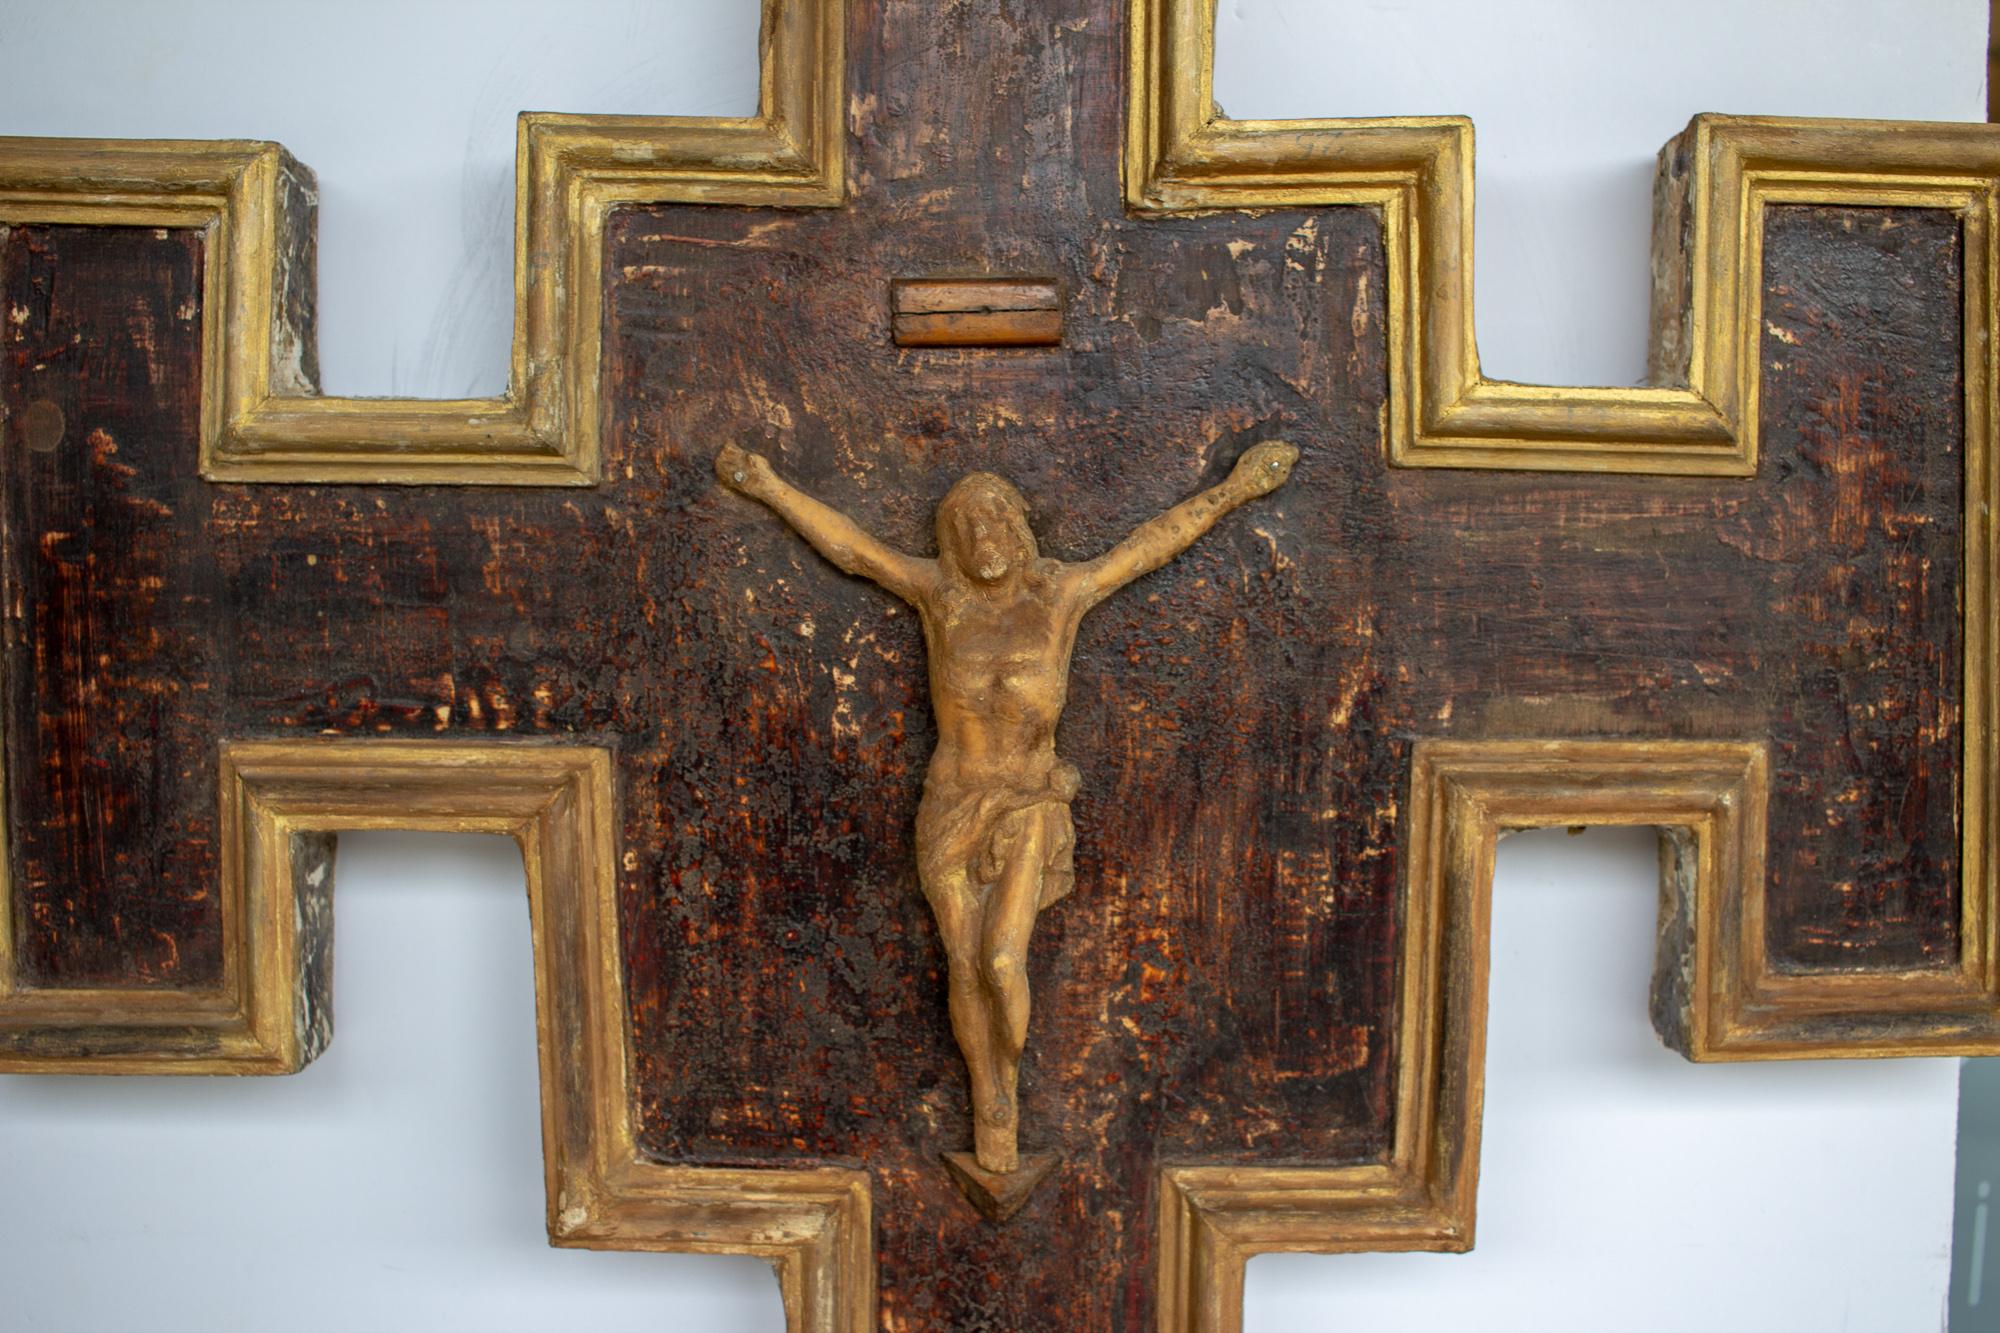 This handmade crucifix wall plaque was uncovered in Italy. The entire piece is crafted from wood and has been hand-painted with a rich mahogany brown and accented with golden gilt. The decorative edge and the hand-carved corpus of Christ are in